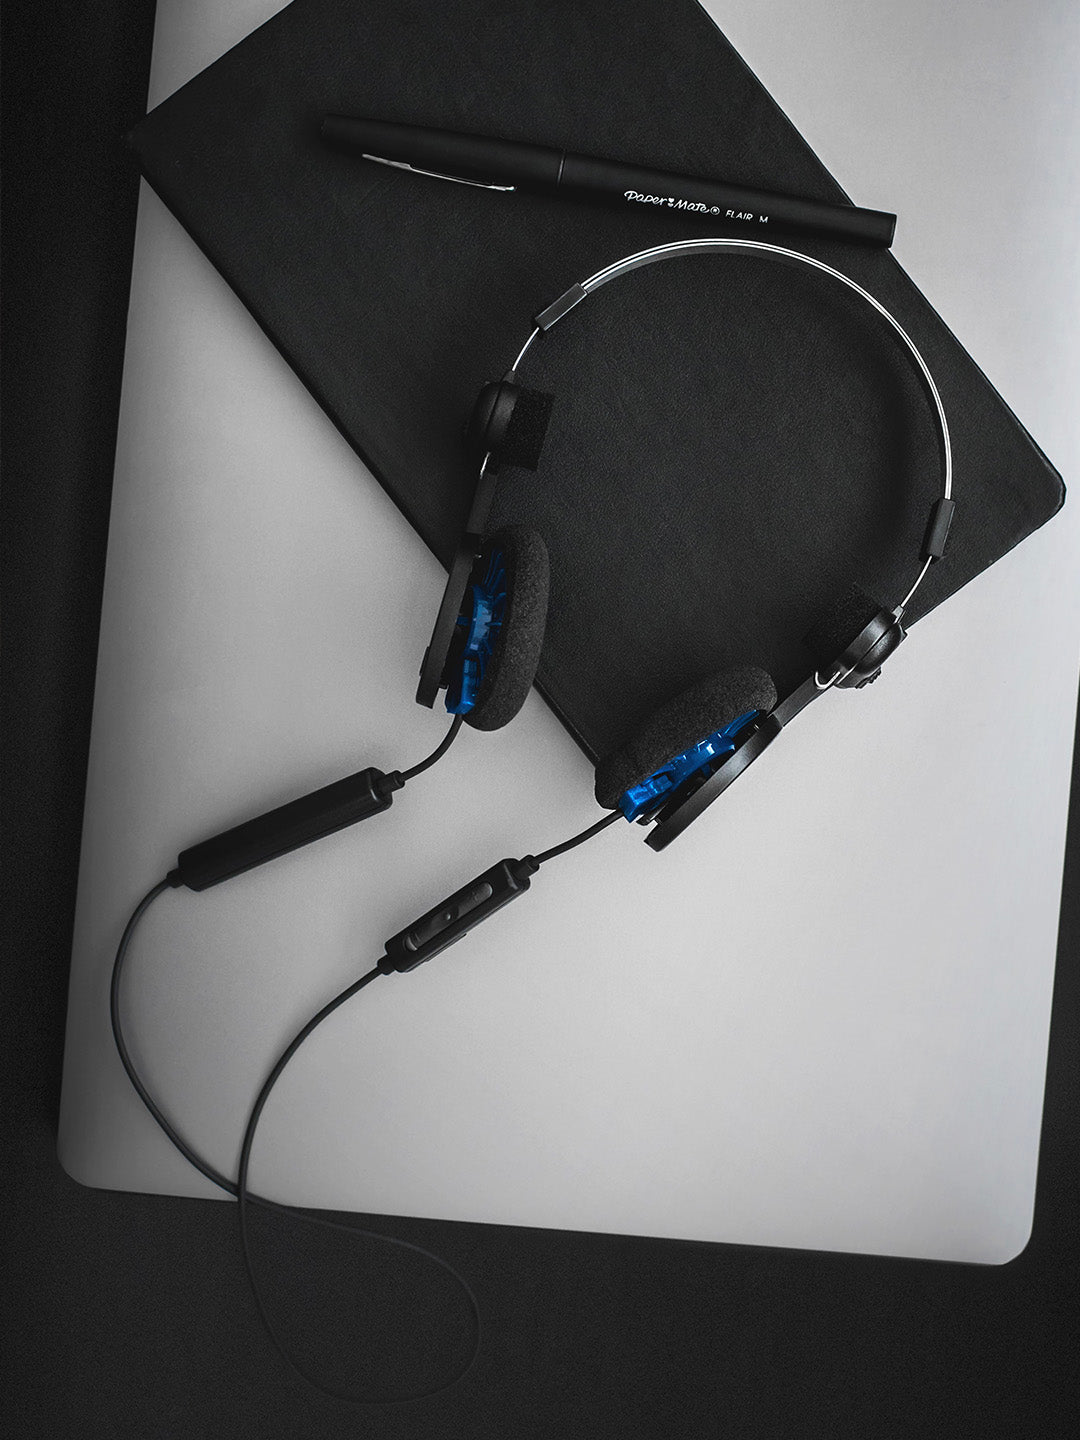  Koss Porta Pro Utility On-Ear Headphones, Detachable  Interchangeable Cord System, Collapsible Design, Stealth Grey : Electronics